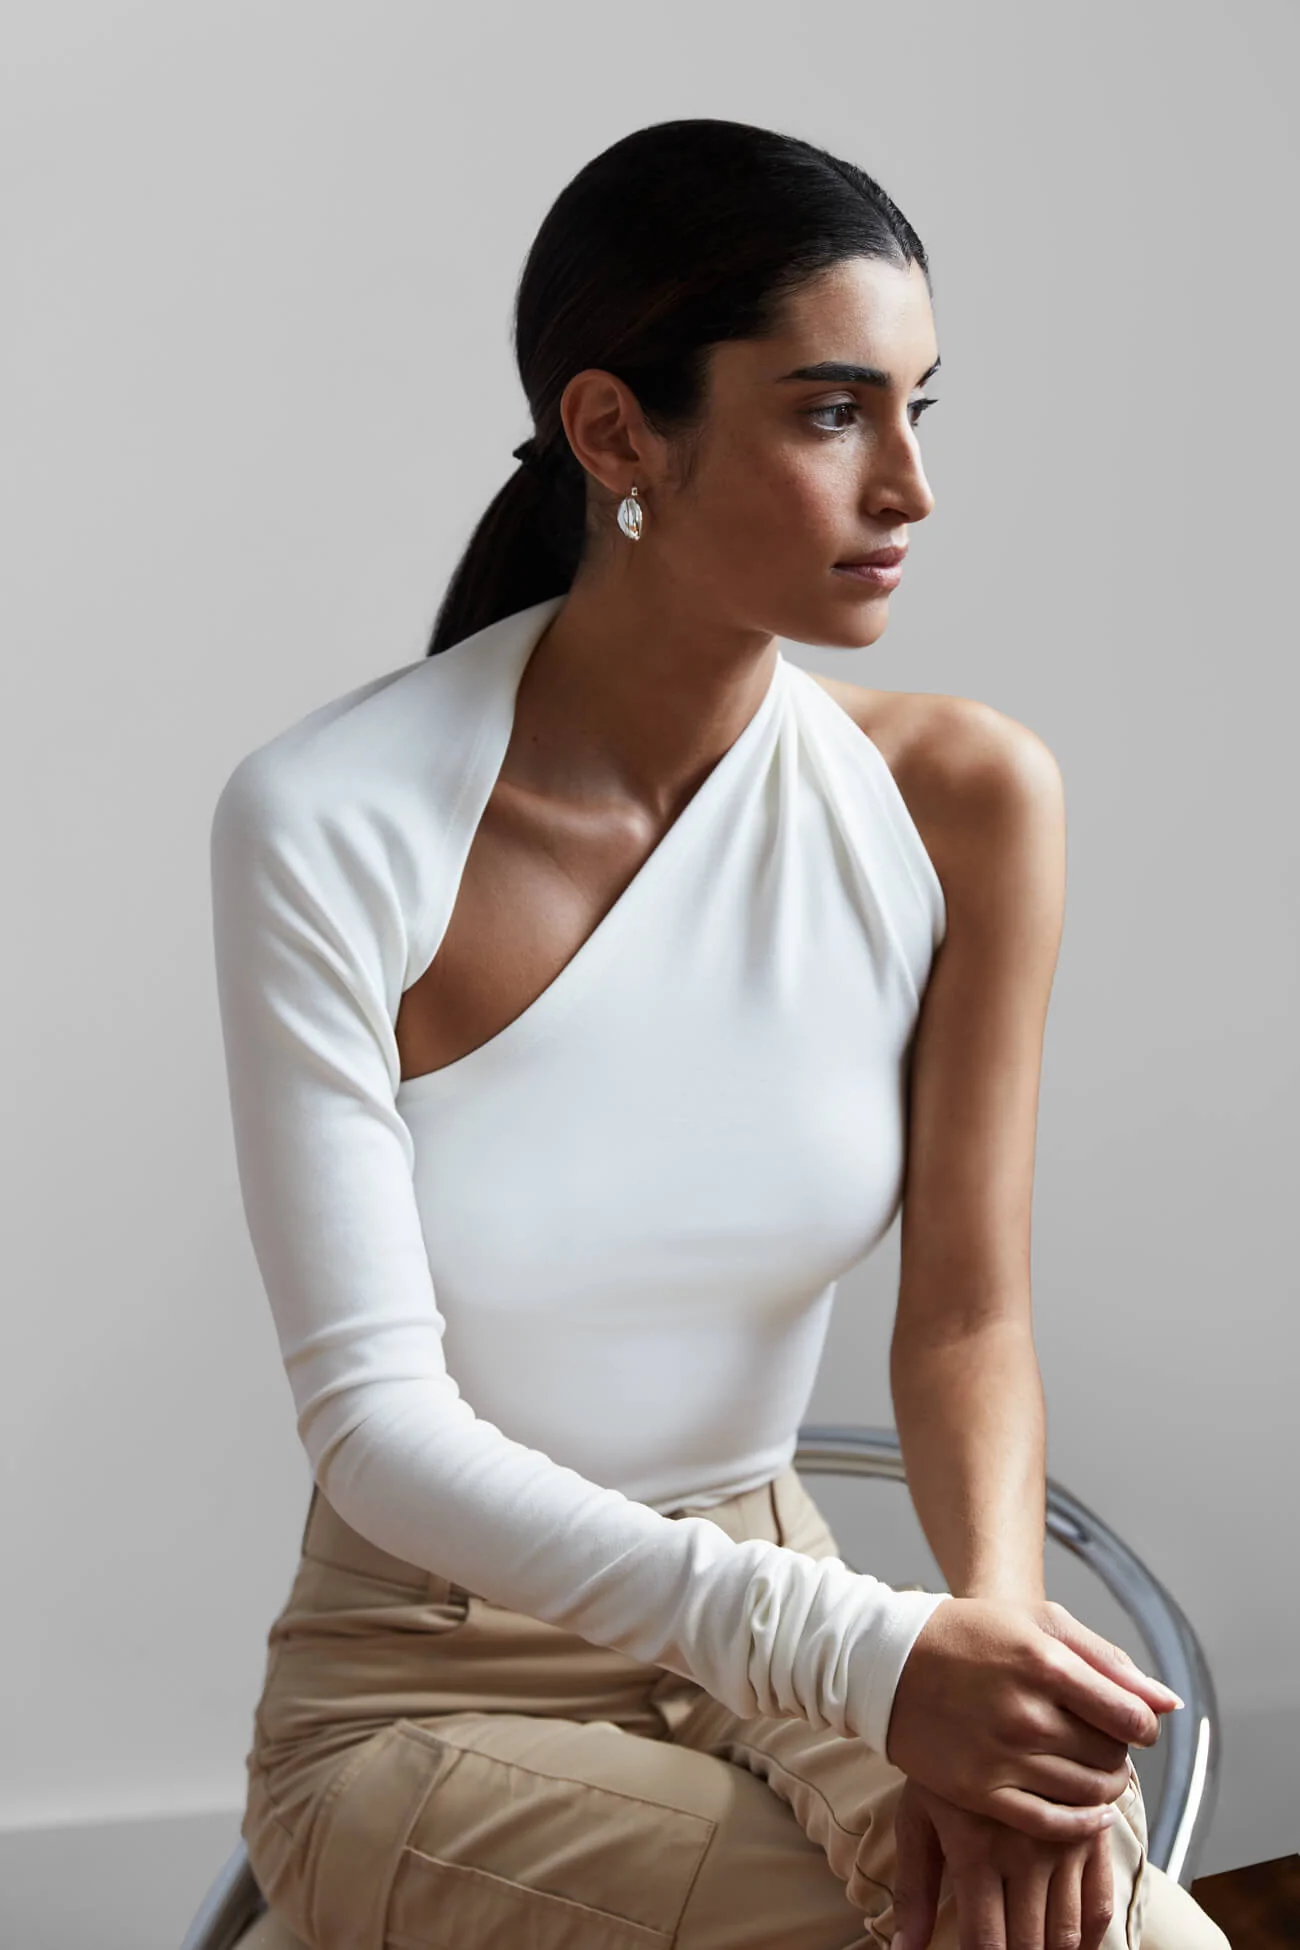 How to Style One Shoulder Top: 15 Low-Key Sexy Outfit Ideas